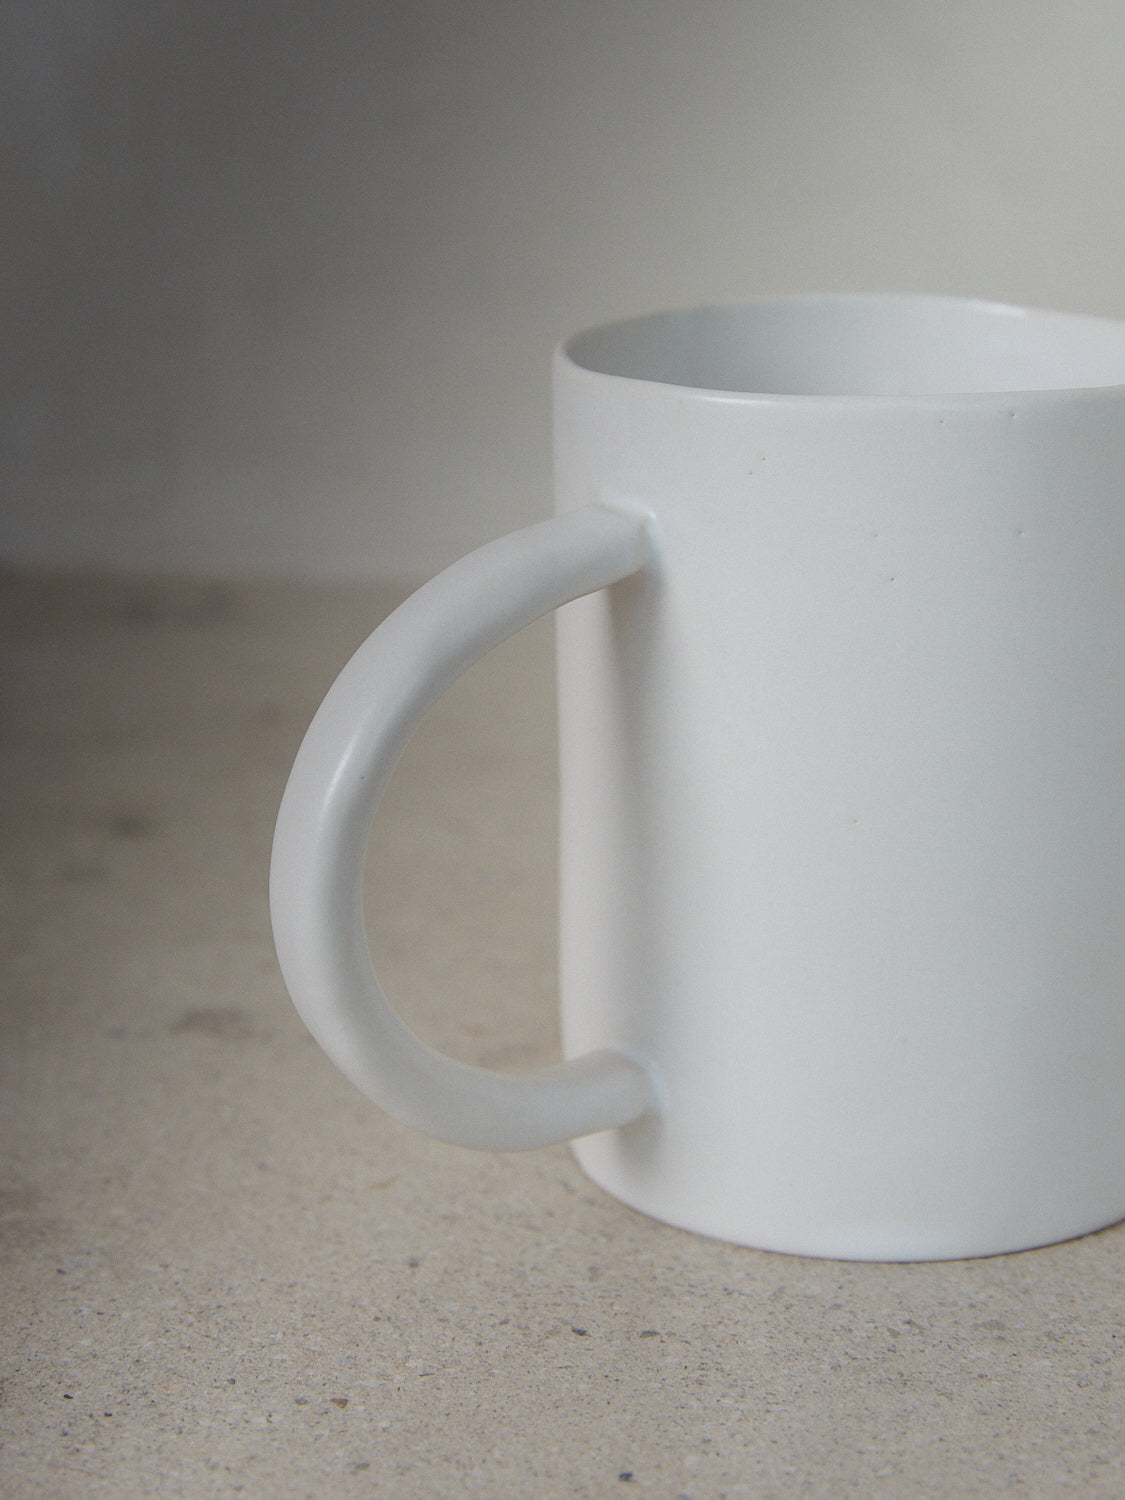 Raw Coffee Mug. Exclusively ours. Handmade oversized coffee mug designed to complement your mornings in classic matte, milky white stoneware. 